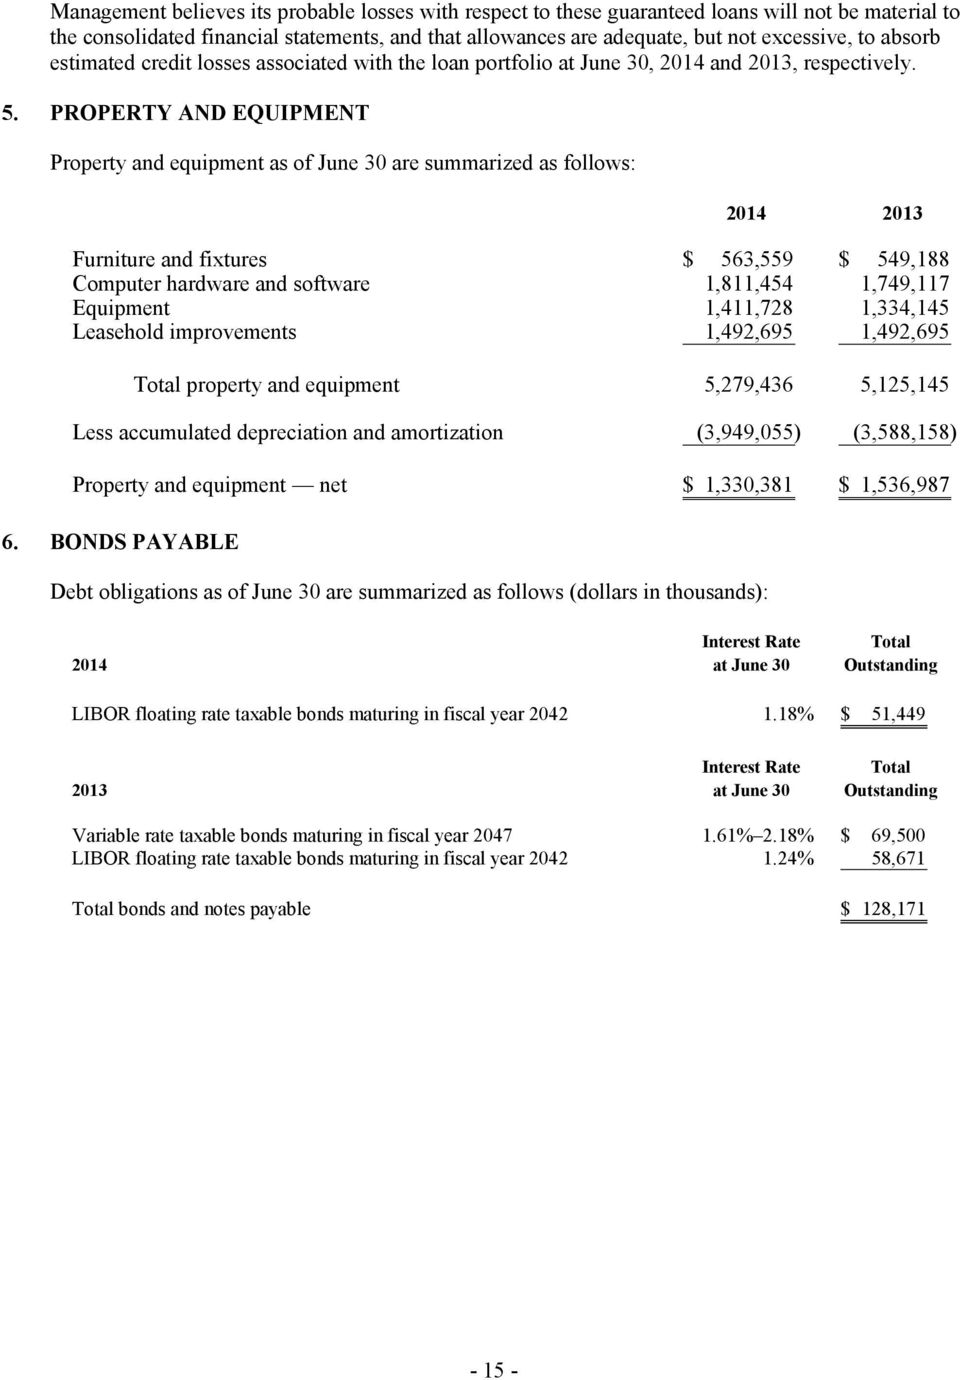 PROPERTY AND EQUIPMENT Property and equipment as of June 30 are summarized as follows: 2014 2013 Furniture and fixtures $ 563,559 $ 549,188 Computer hardware and software 1,811,454 1,749,117